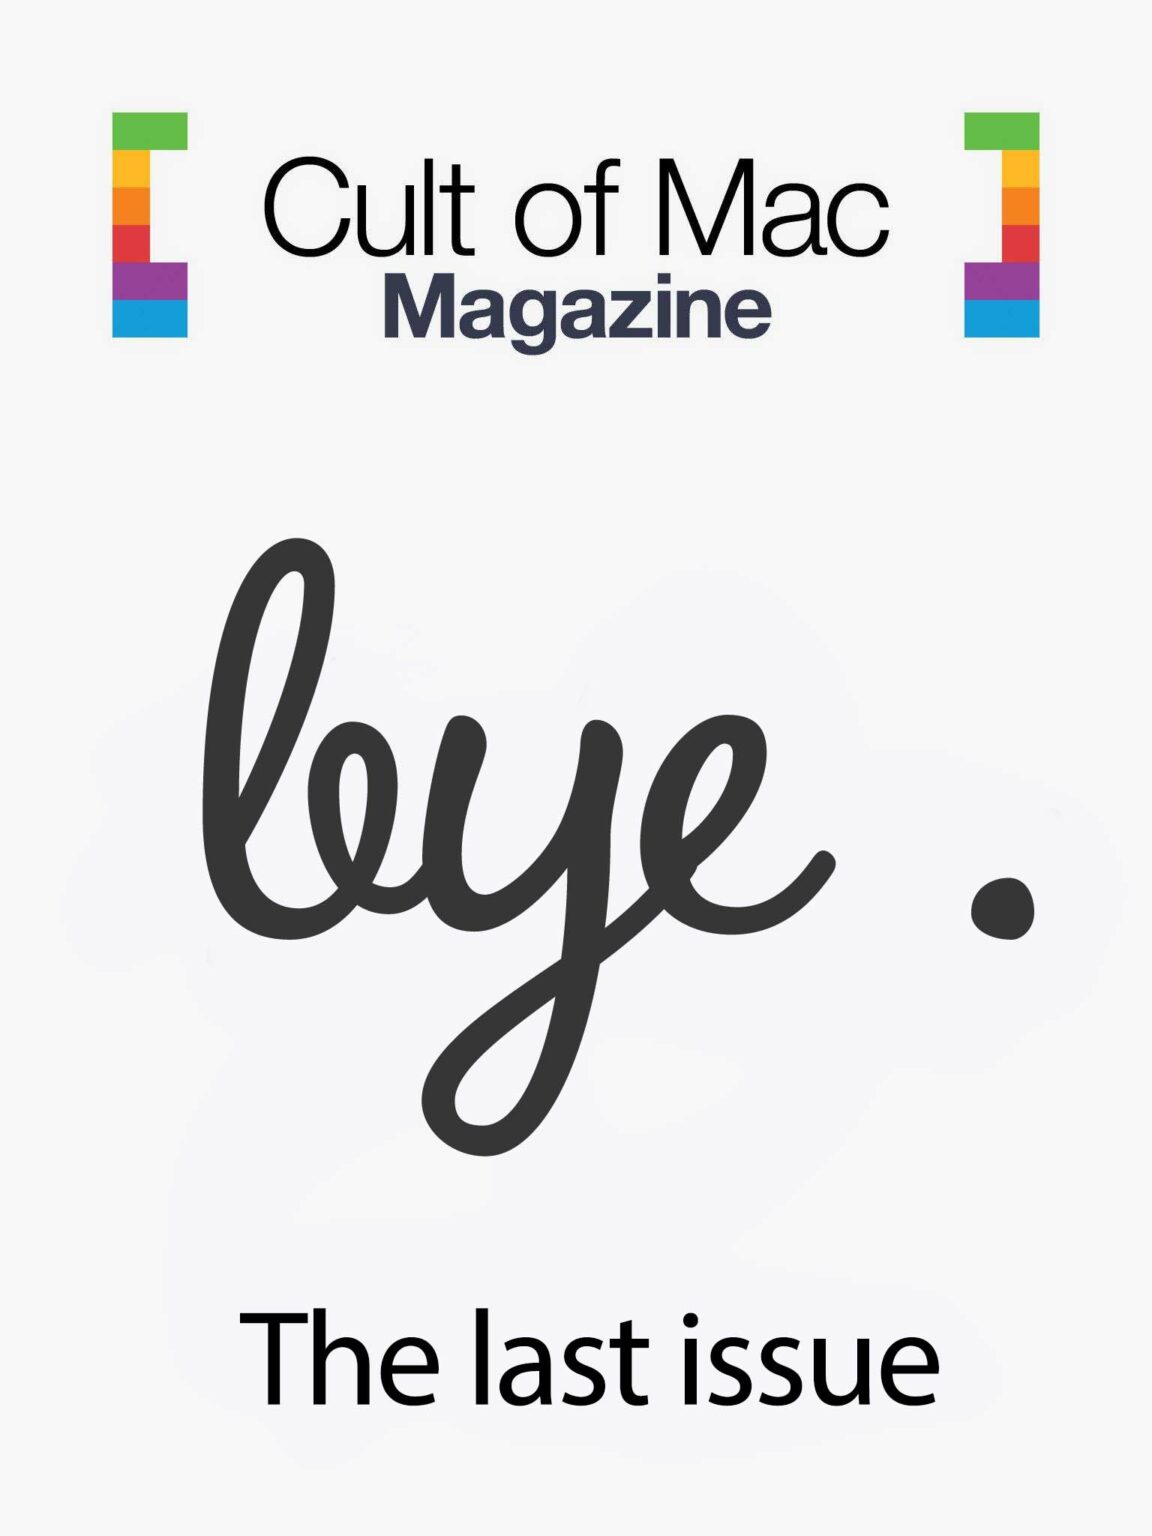 Cult of Mac magazine last issue cover